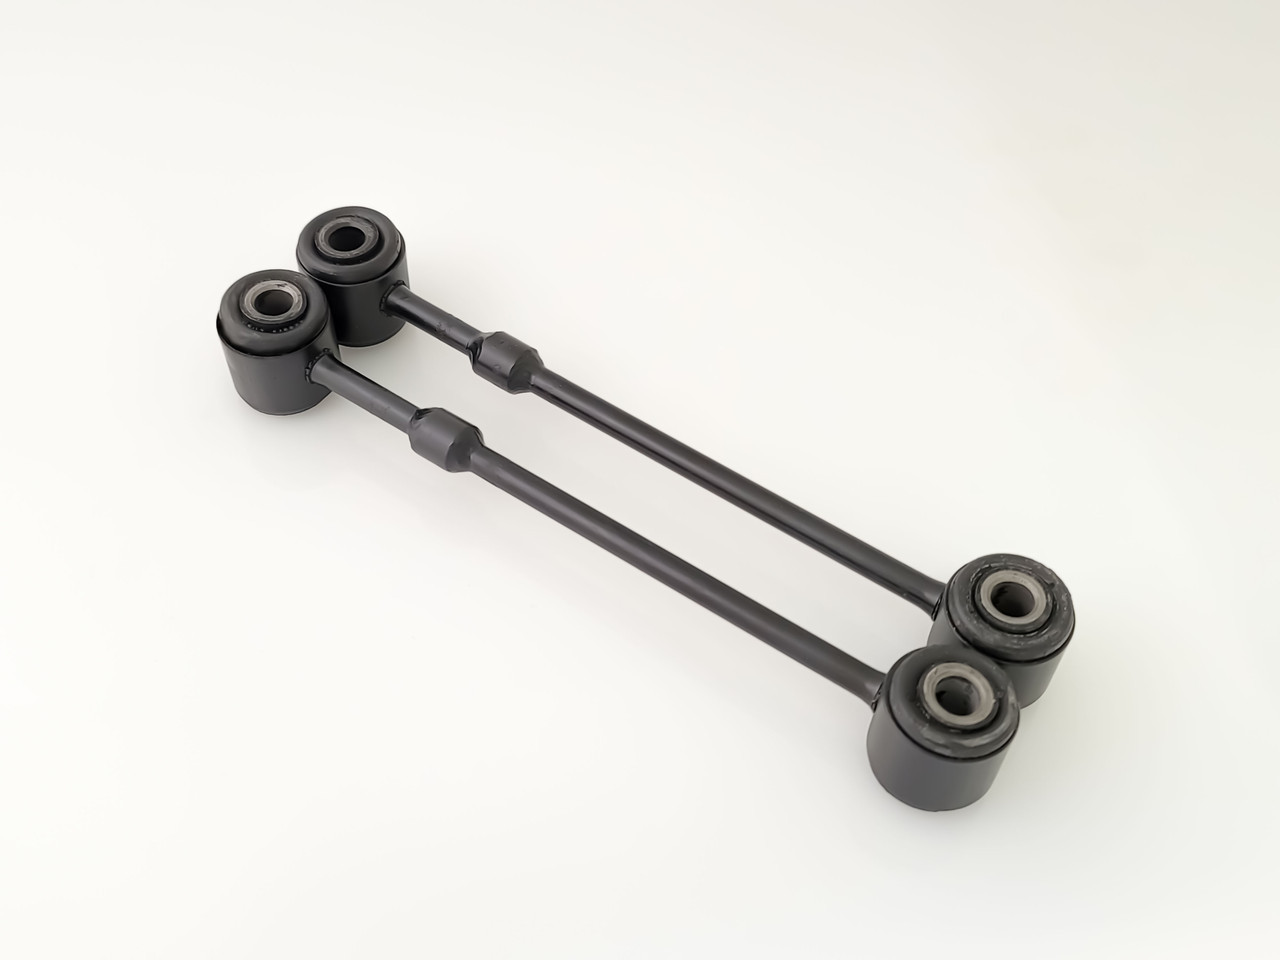 HHP Shortened Rear Sway Bar End Links For 17" to 18" Drag Wheels With Factory Sway Bars